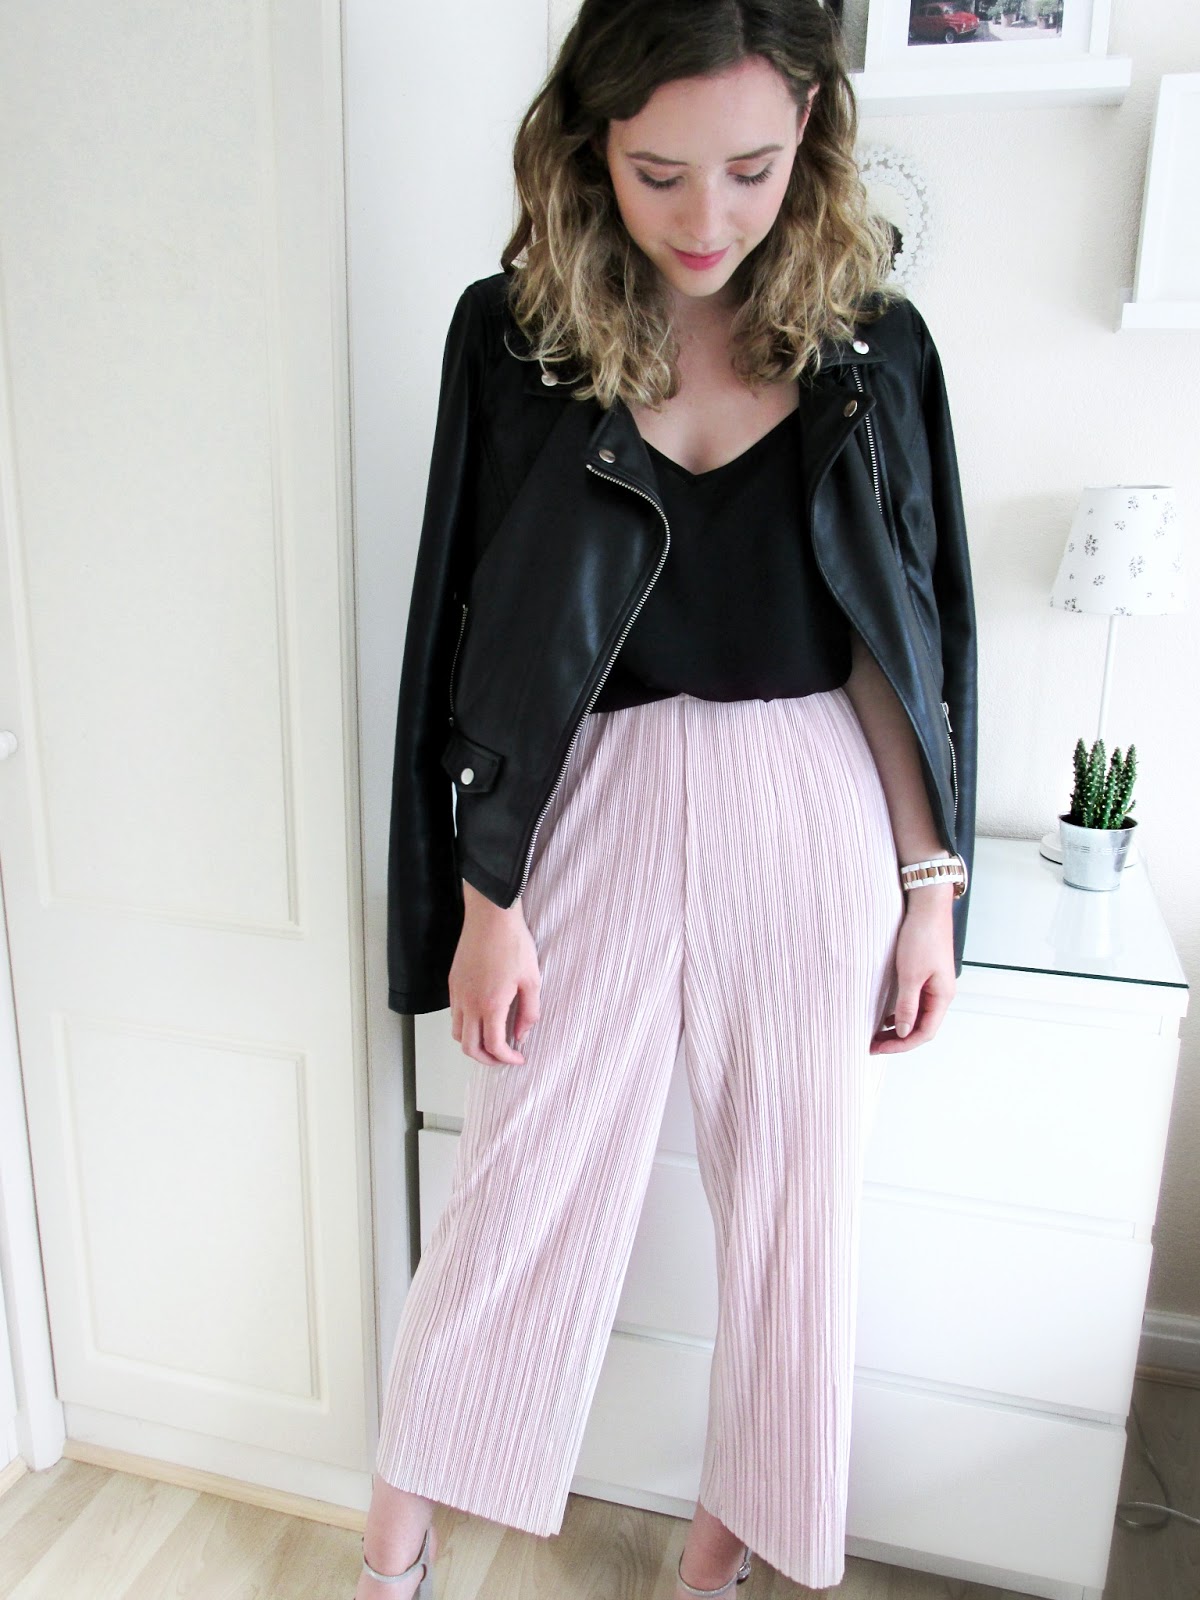 The Evening Look: Pink Culottes | All Things Foxy